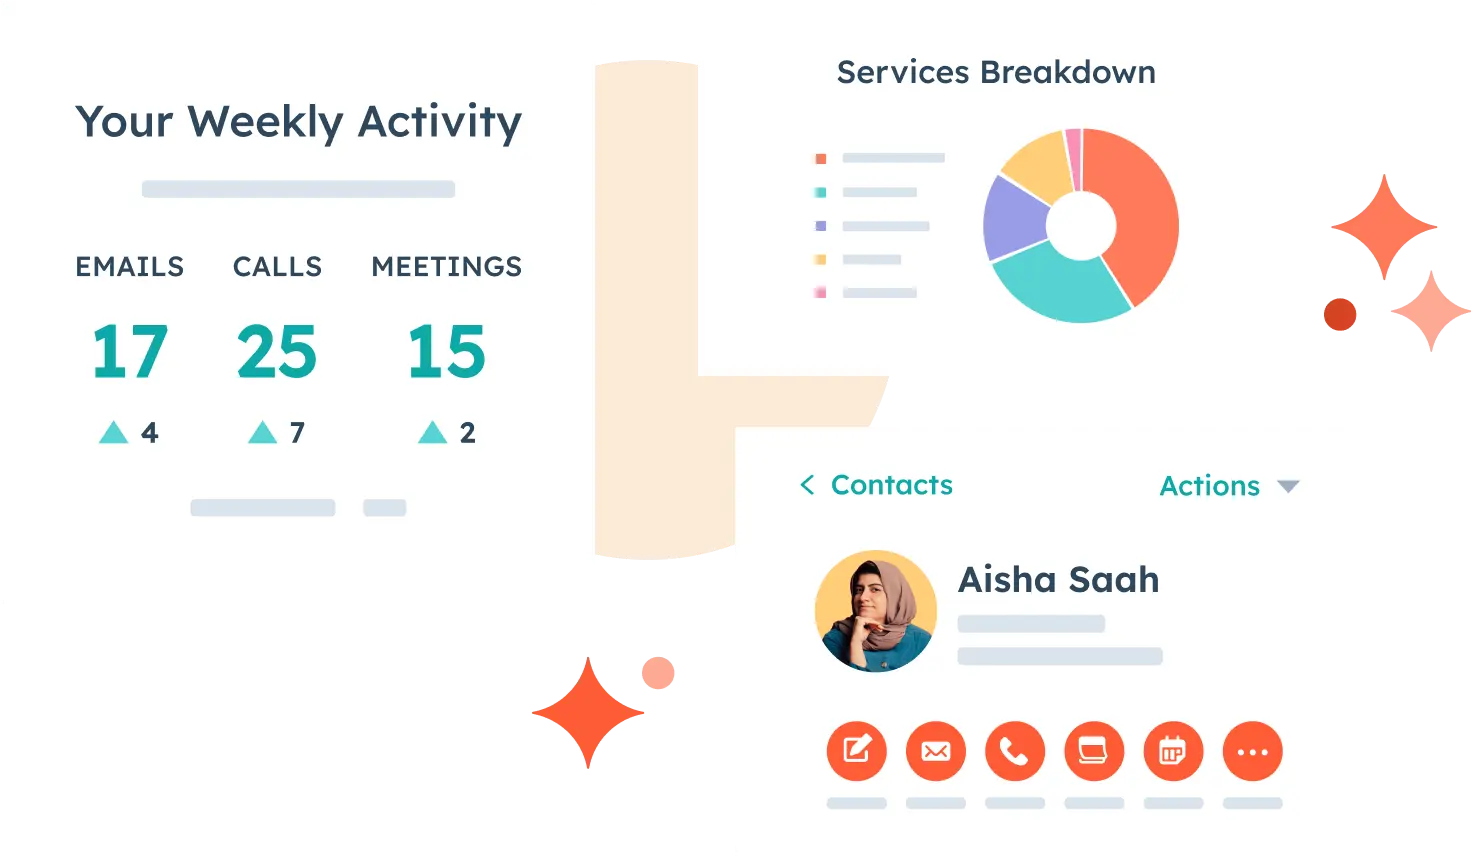 View of a HubSpot user's weekly email, calling, and meeting activity, a contact record, and a customer service report in their HubSpot customer platform